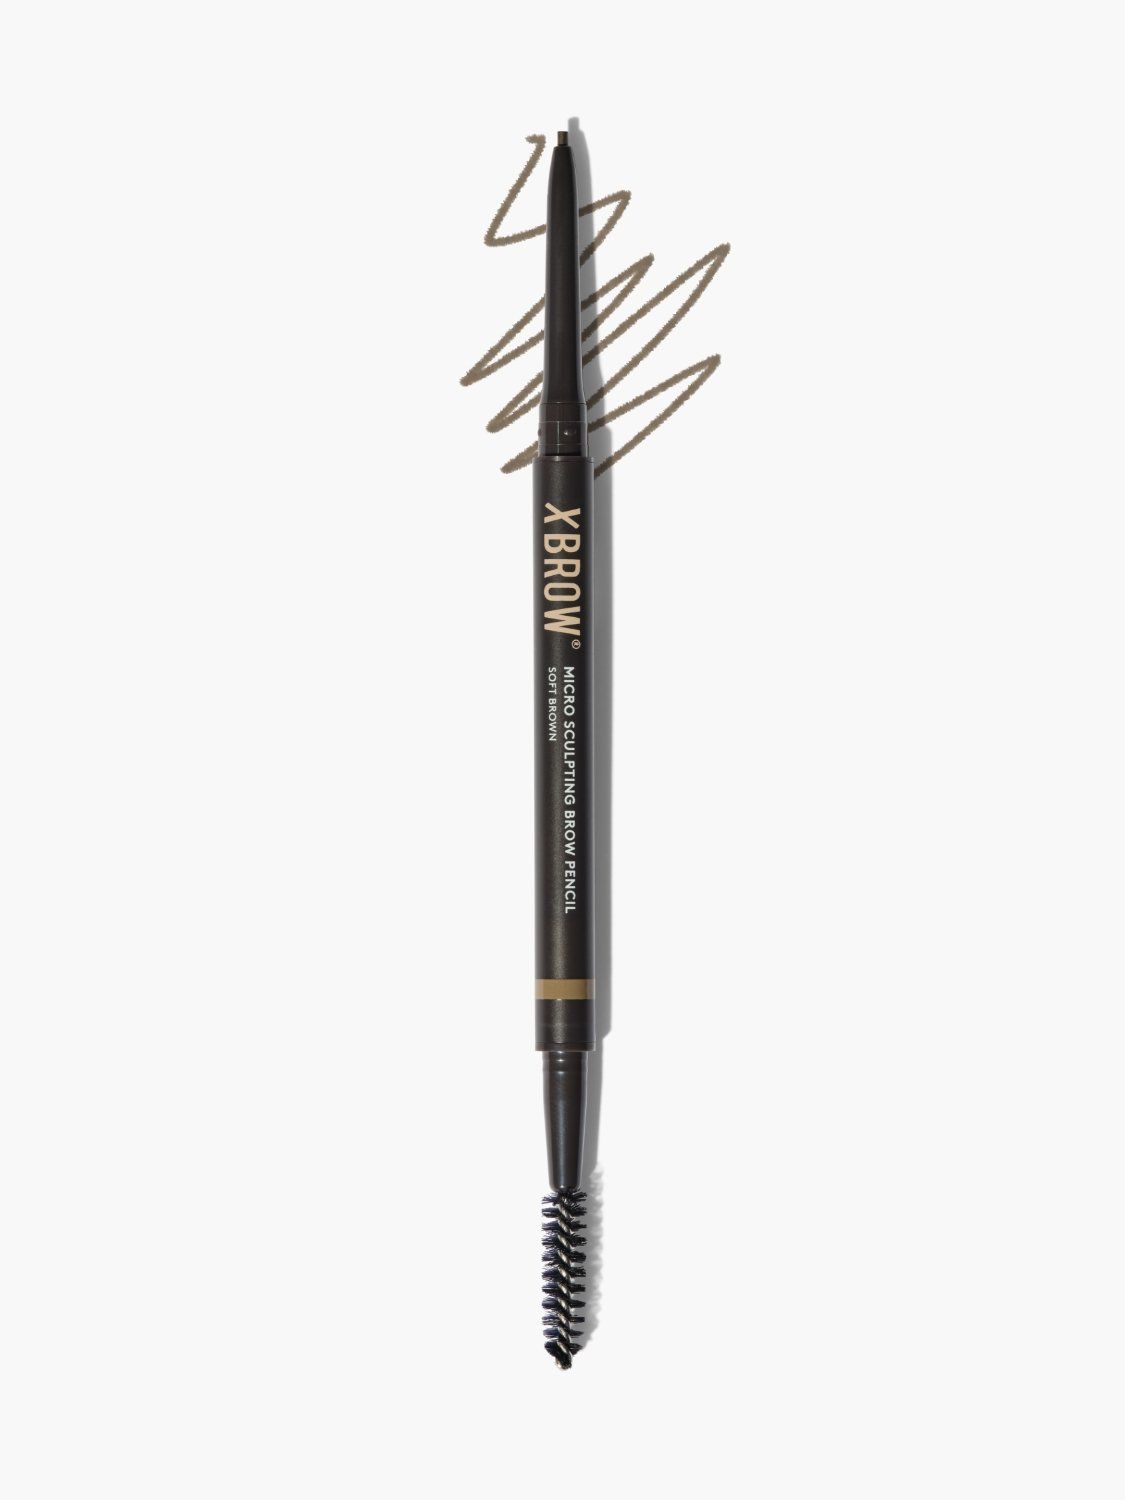 Xbrow Micro Sculpting Brow Pencil - Soft Brown